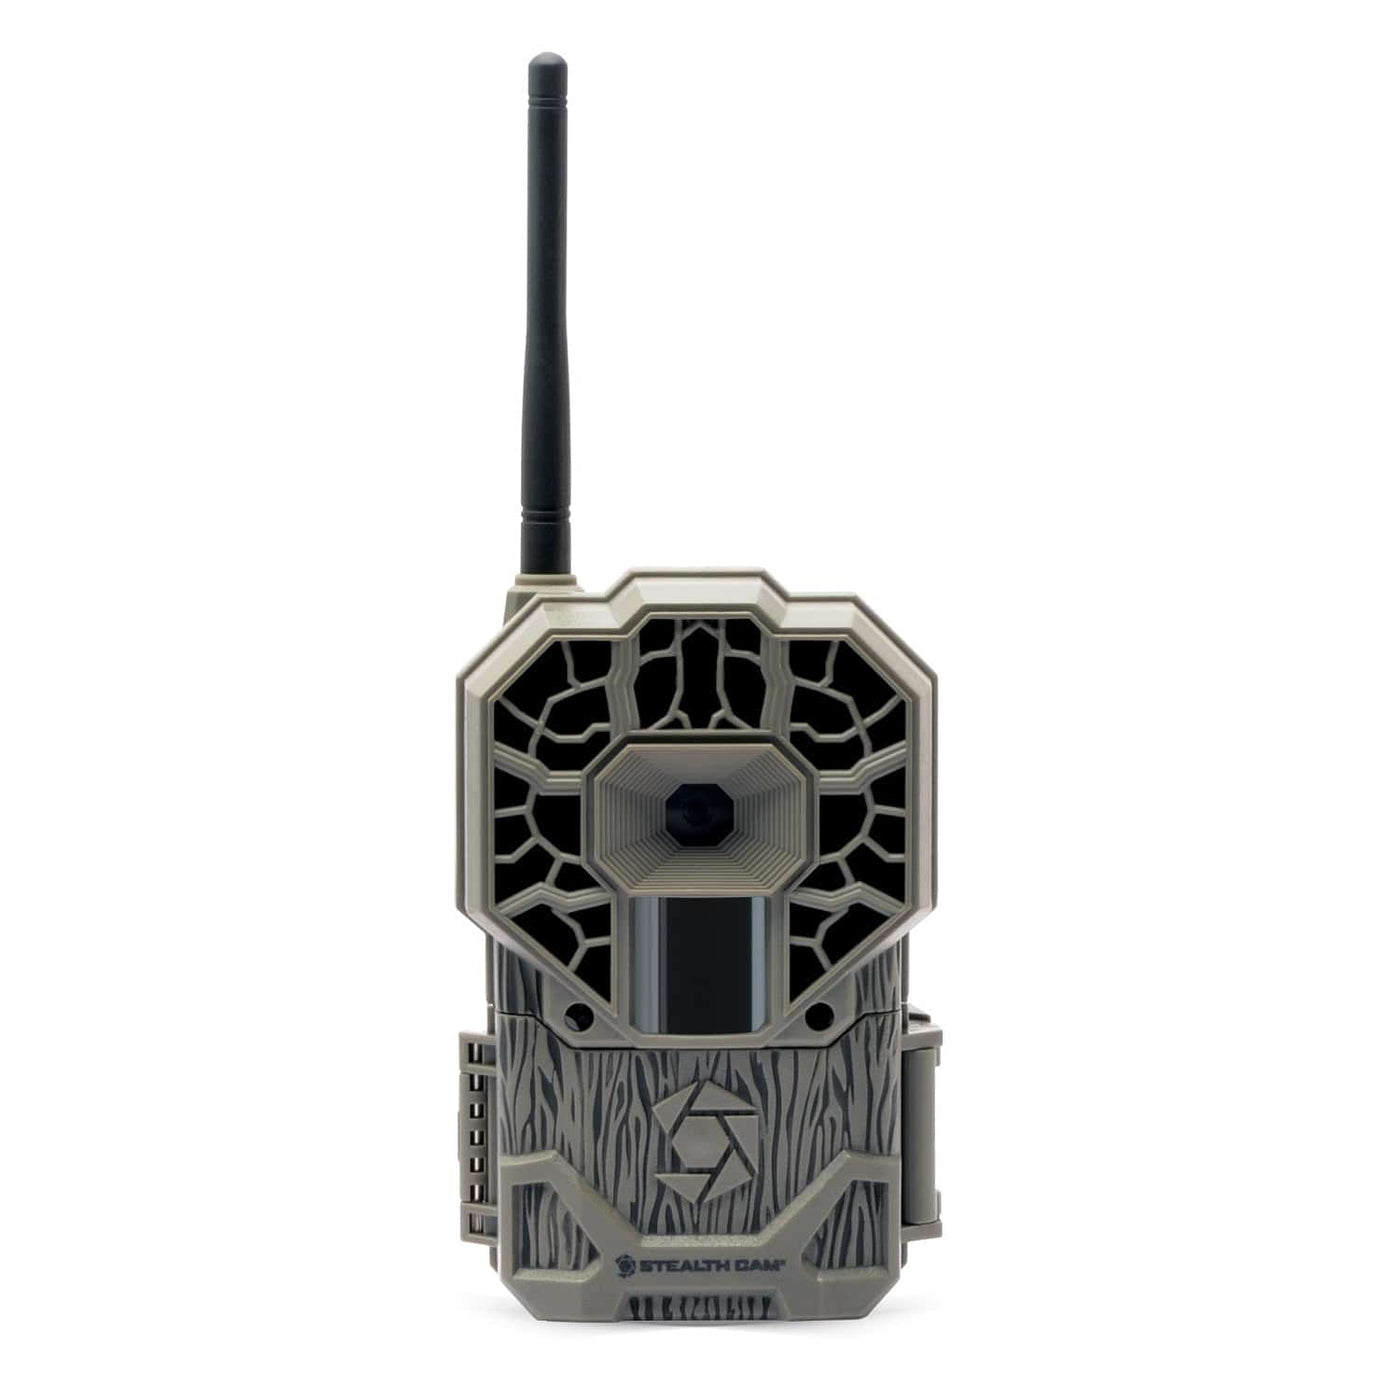 Stealth Cam Stealth Cam GX Wireless Game Camera AT and T Hunting